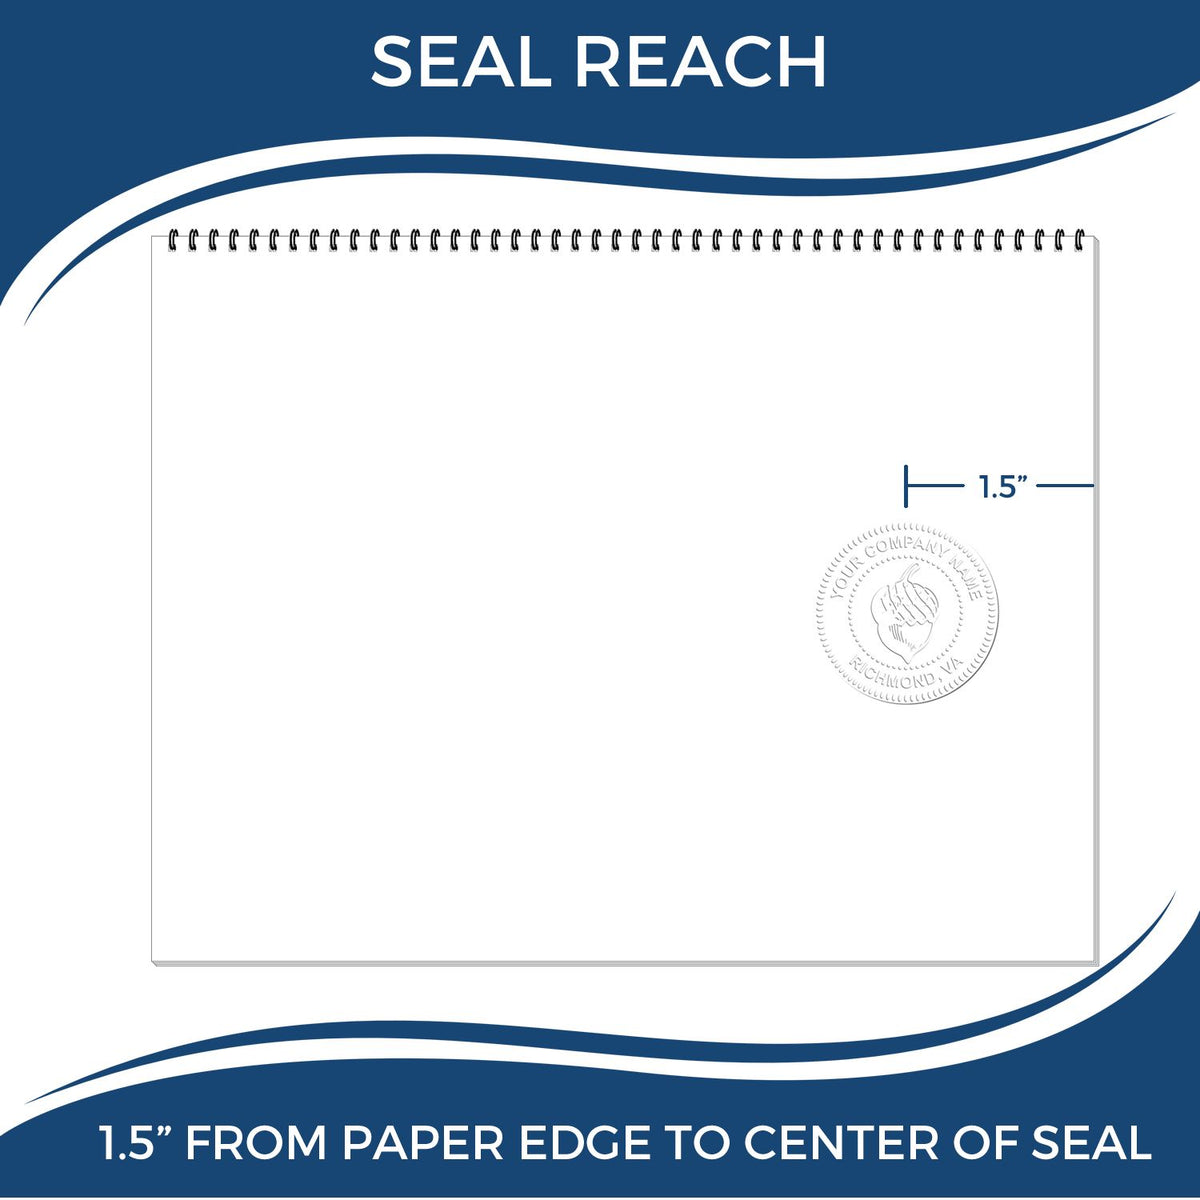 An infographic showing the seal reach which is represented by a ruler and a miniature seal image of the Gift Illinois Architect Seal